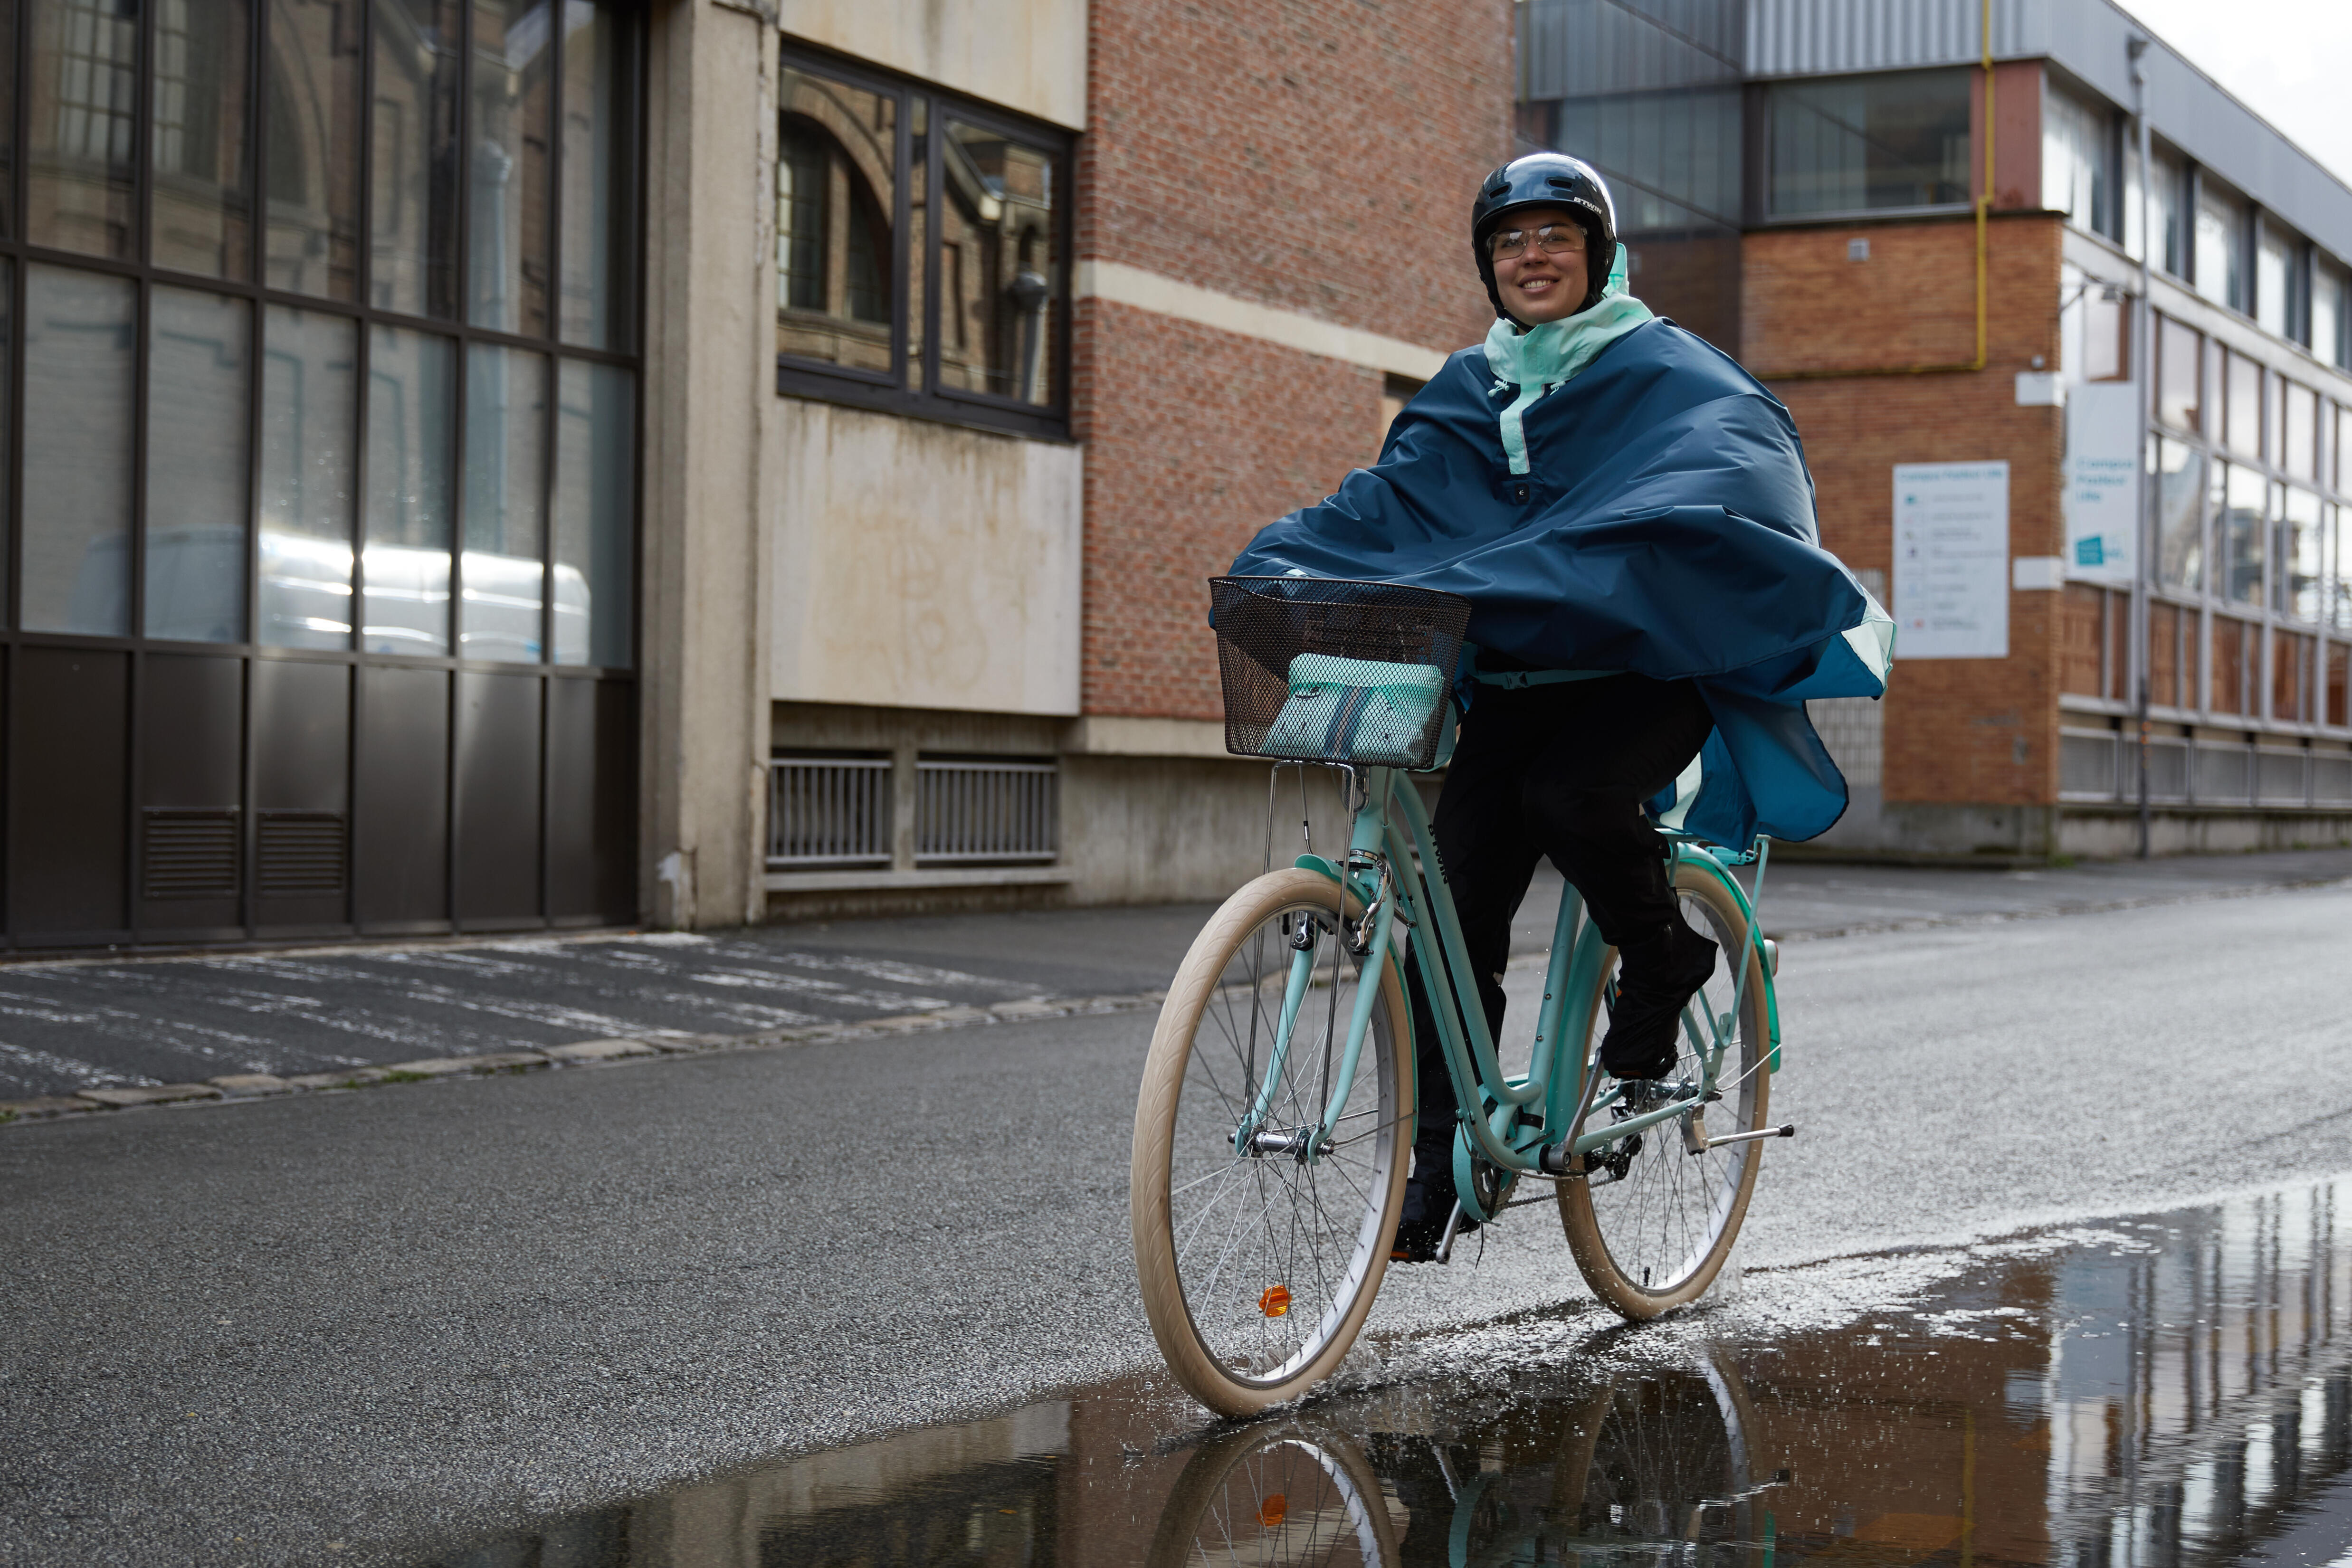 CAN YOU RIDE WHEN IT'S RAINING? ARE THE COMPONENTS WATERTIGHT?